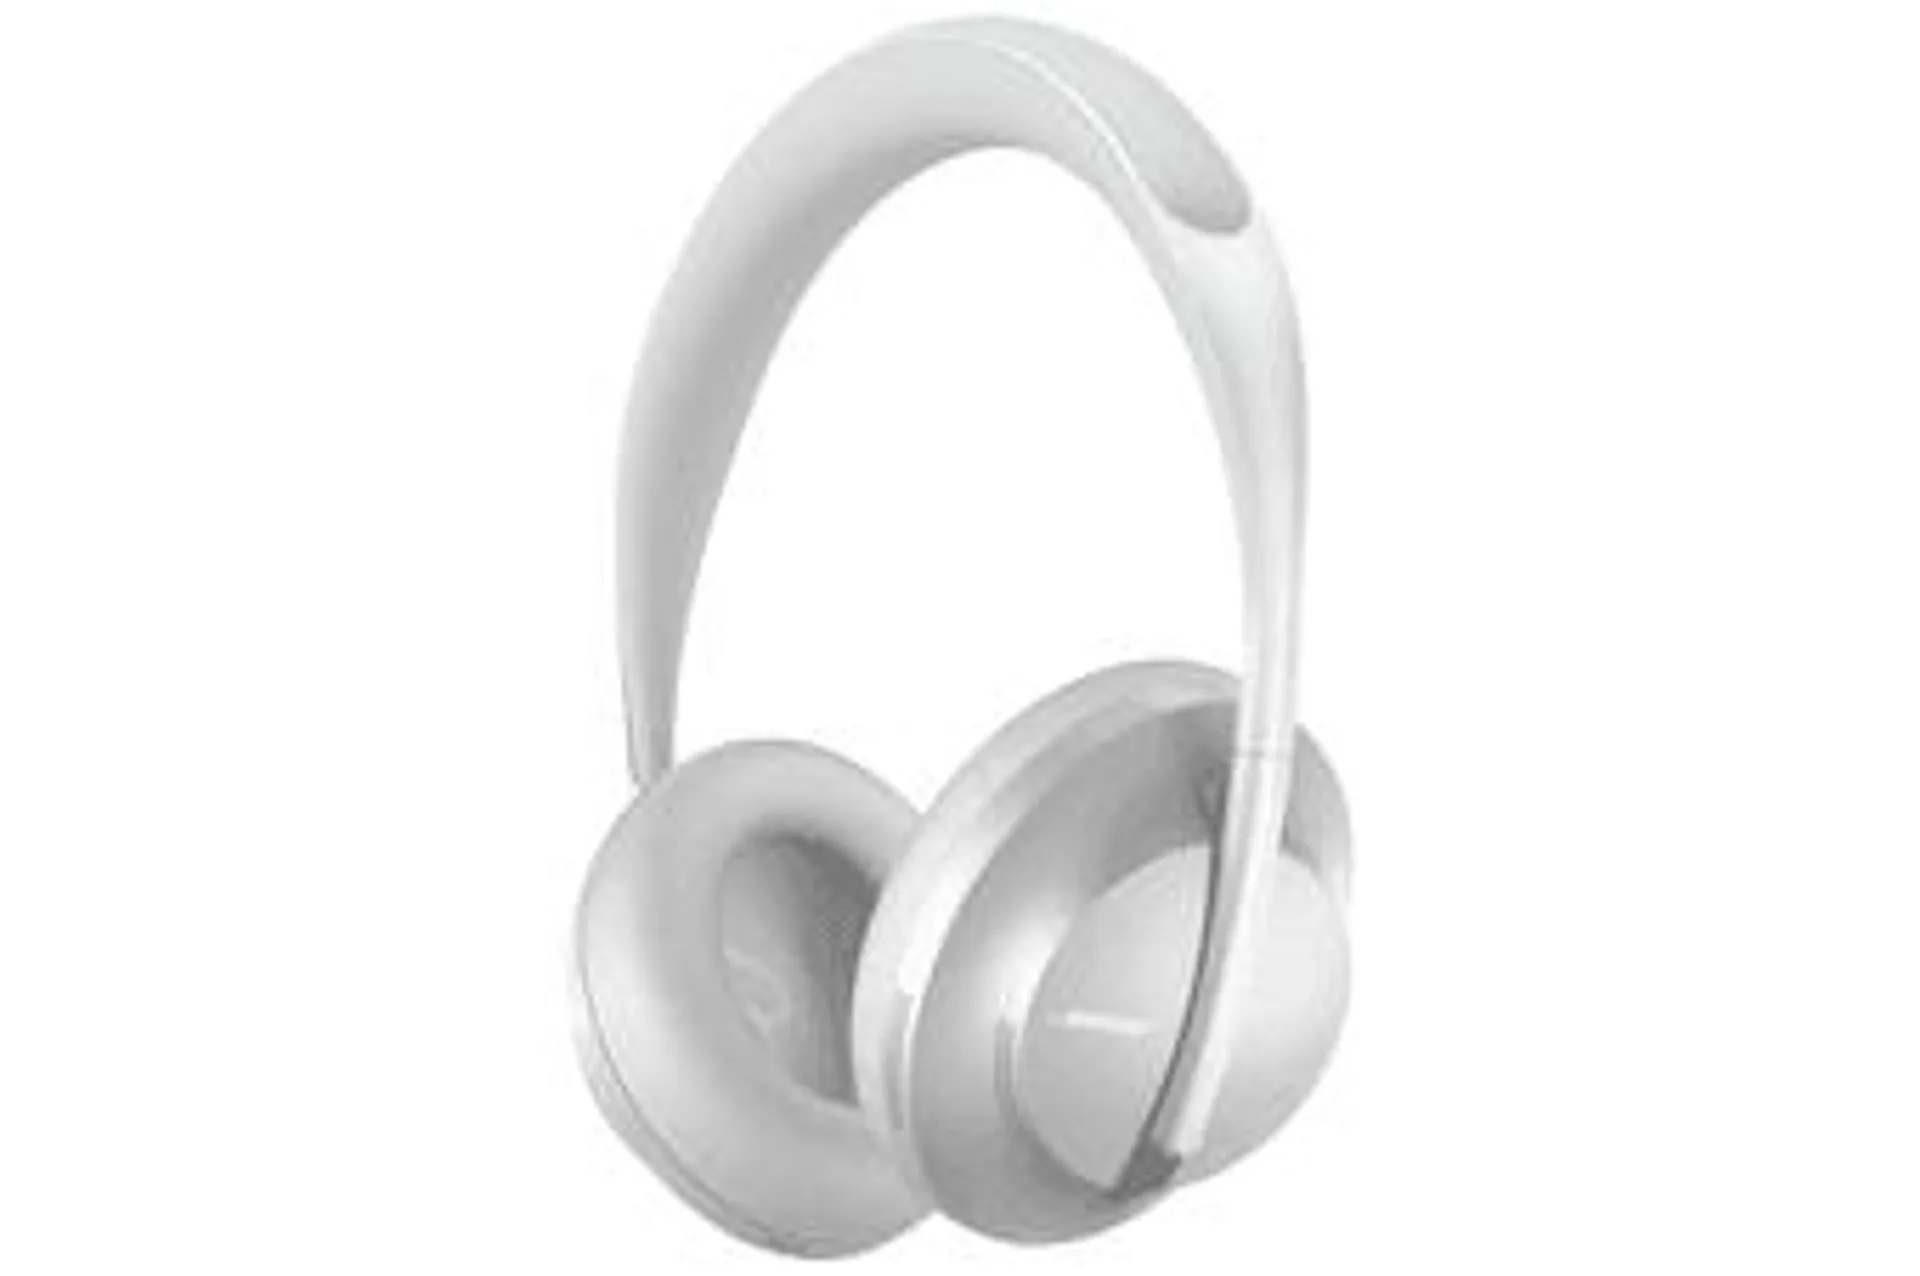 Bose Noise Cancelling Headphones 700 (Silver)